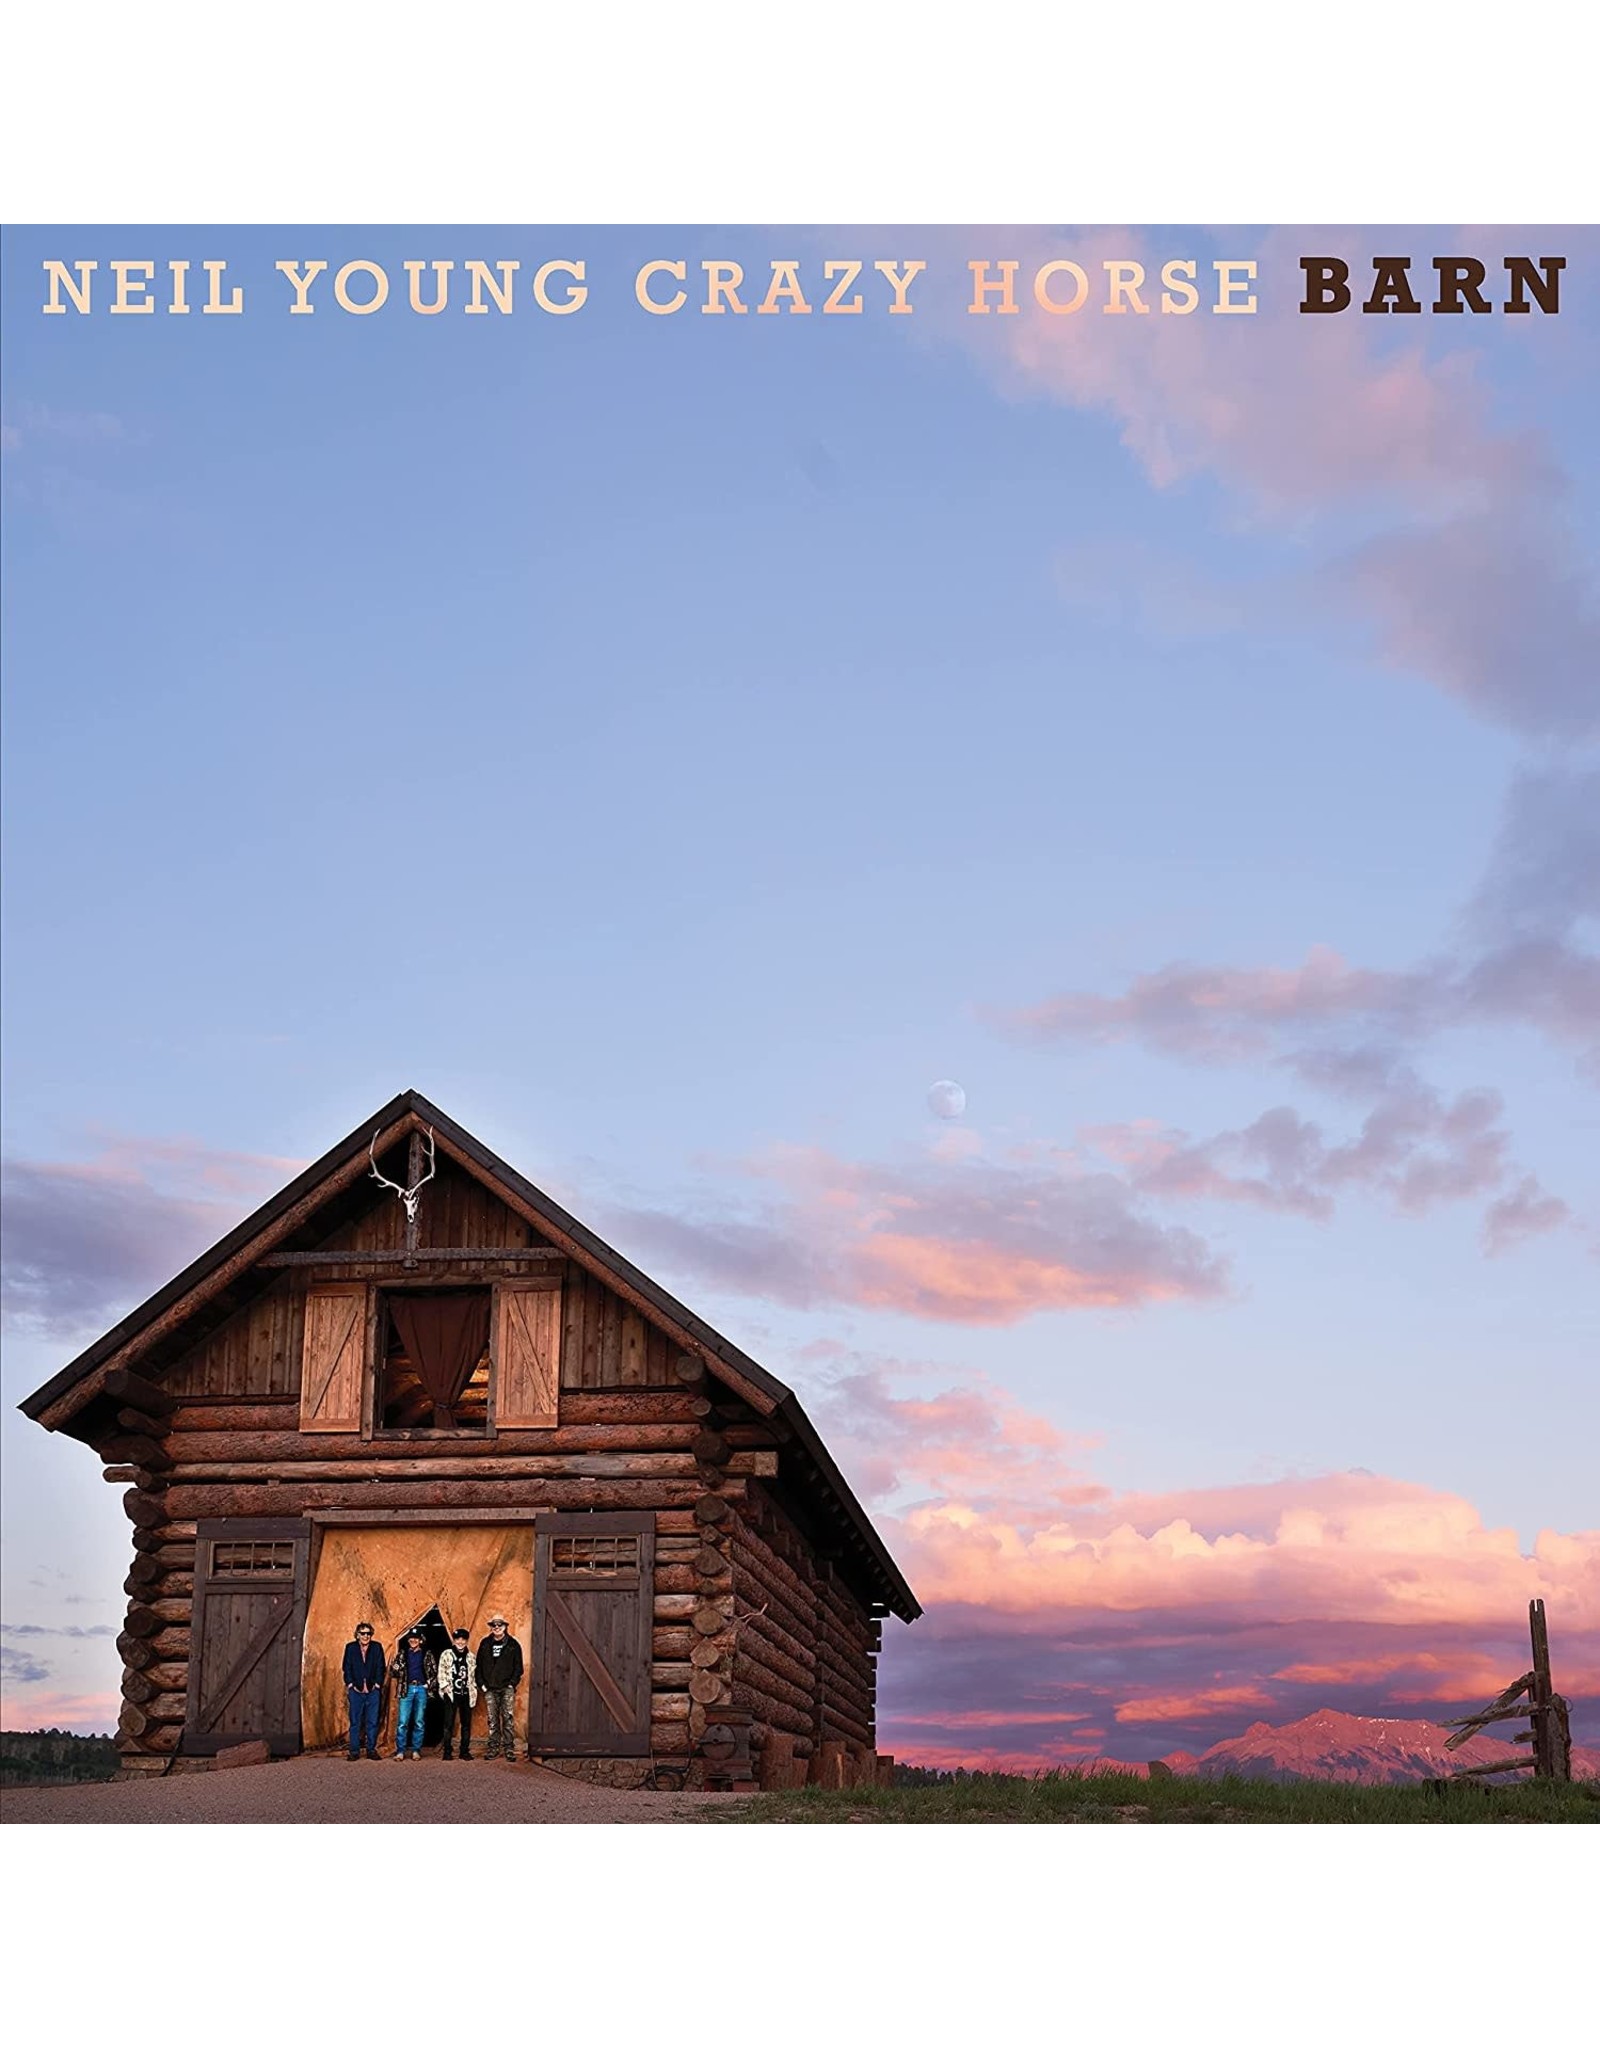 Neil Young - Barn (Deluxe Edition)